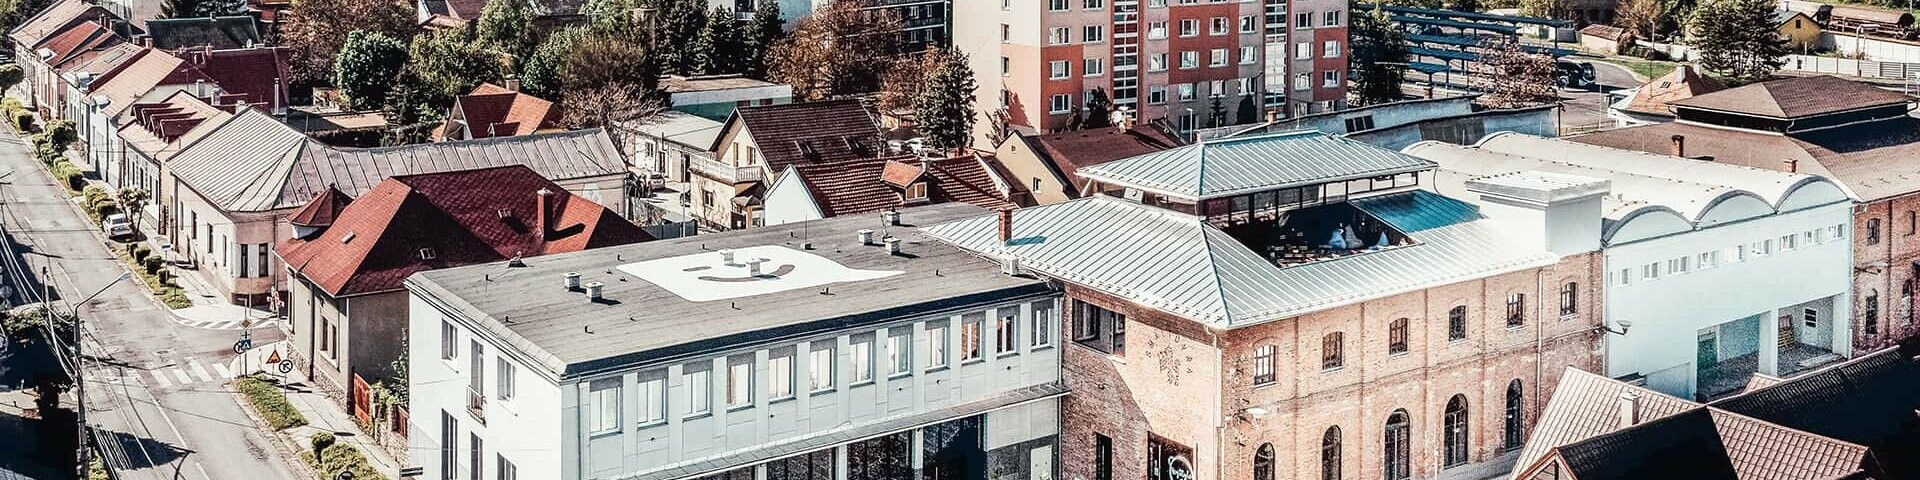 Bird´s view of the Smaltovna building. The roof is clad with Prefalz in plain aluminium. In the background several buildings of the city can be seen.